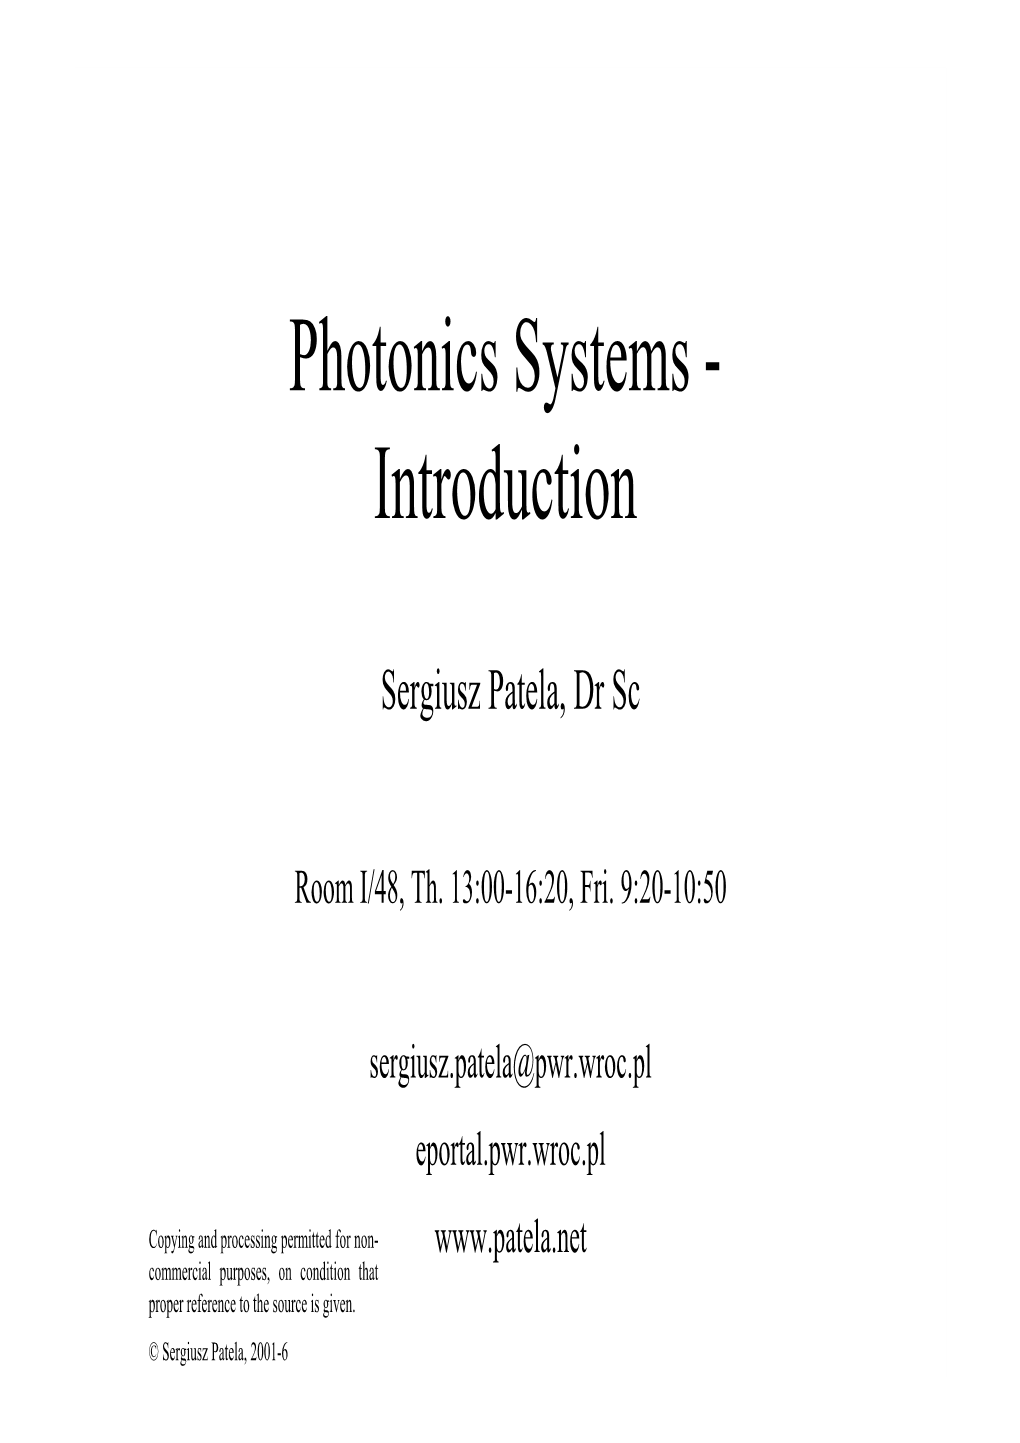 Photonics Systems - Introduction